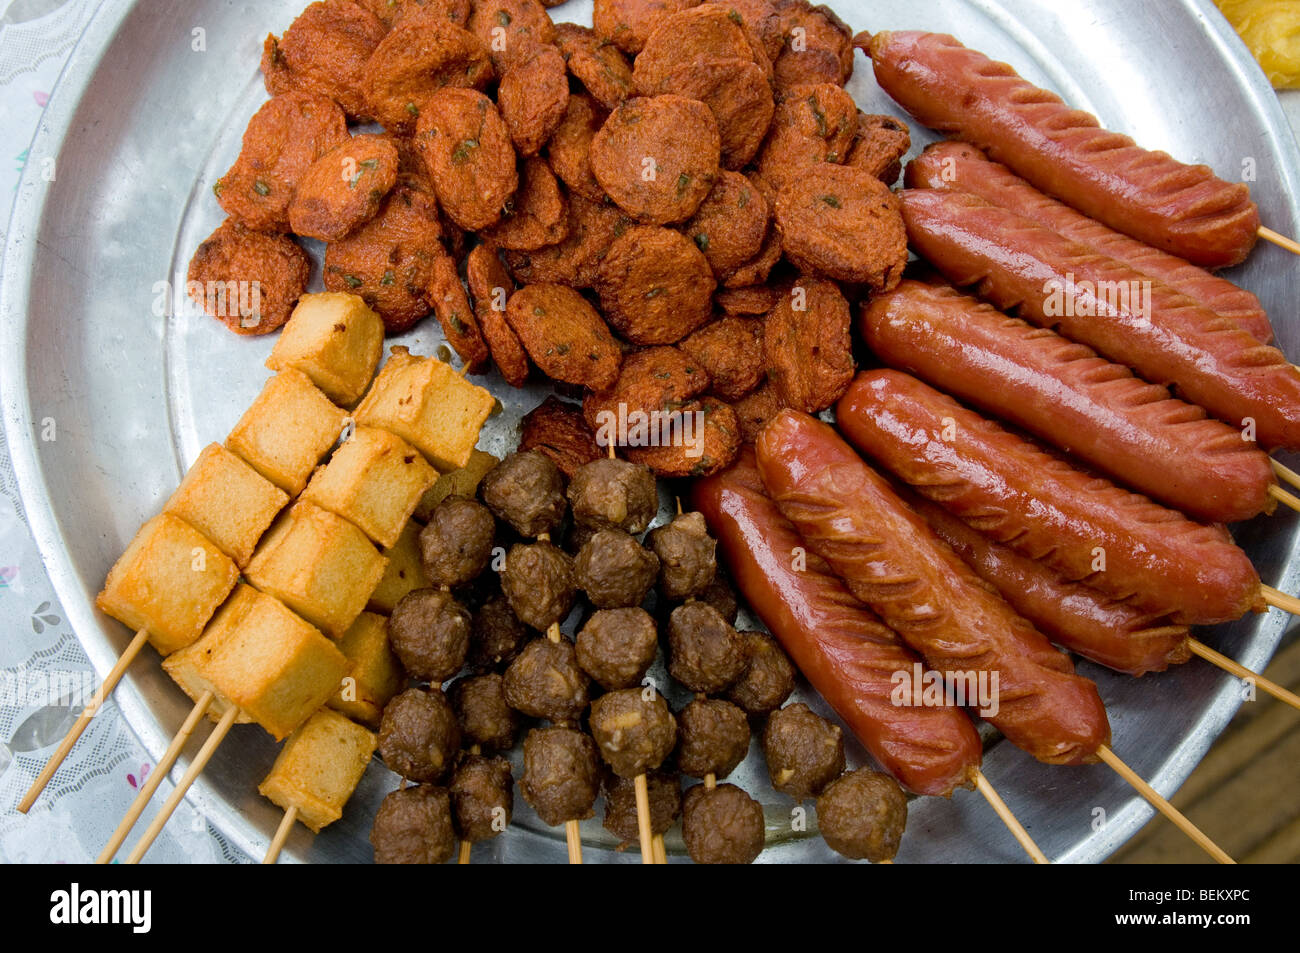 Sausages and other Thai snack foods, Bangkok Stock Photo